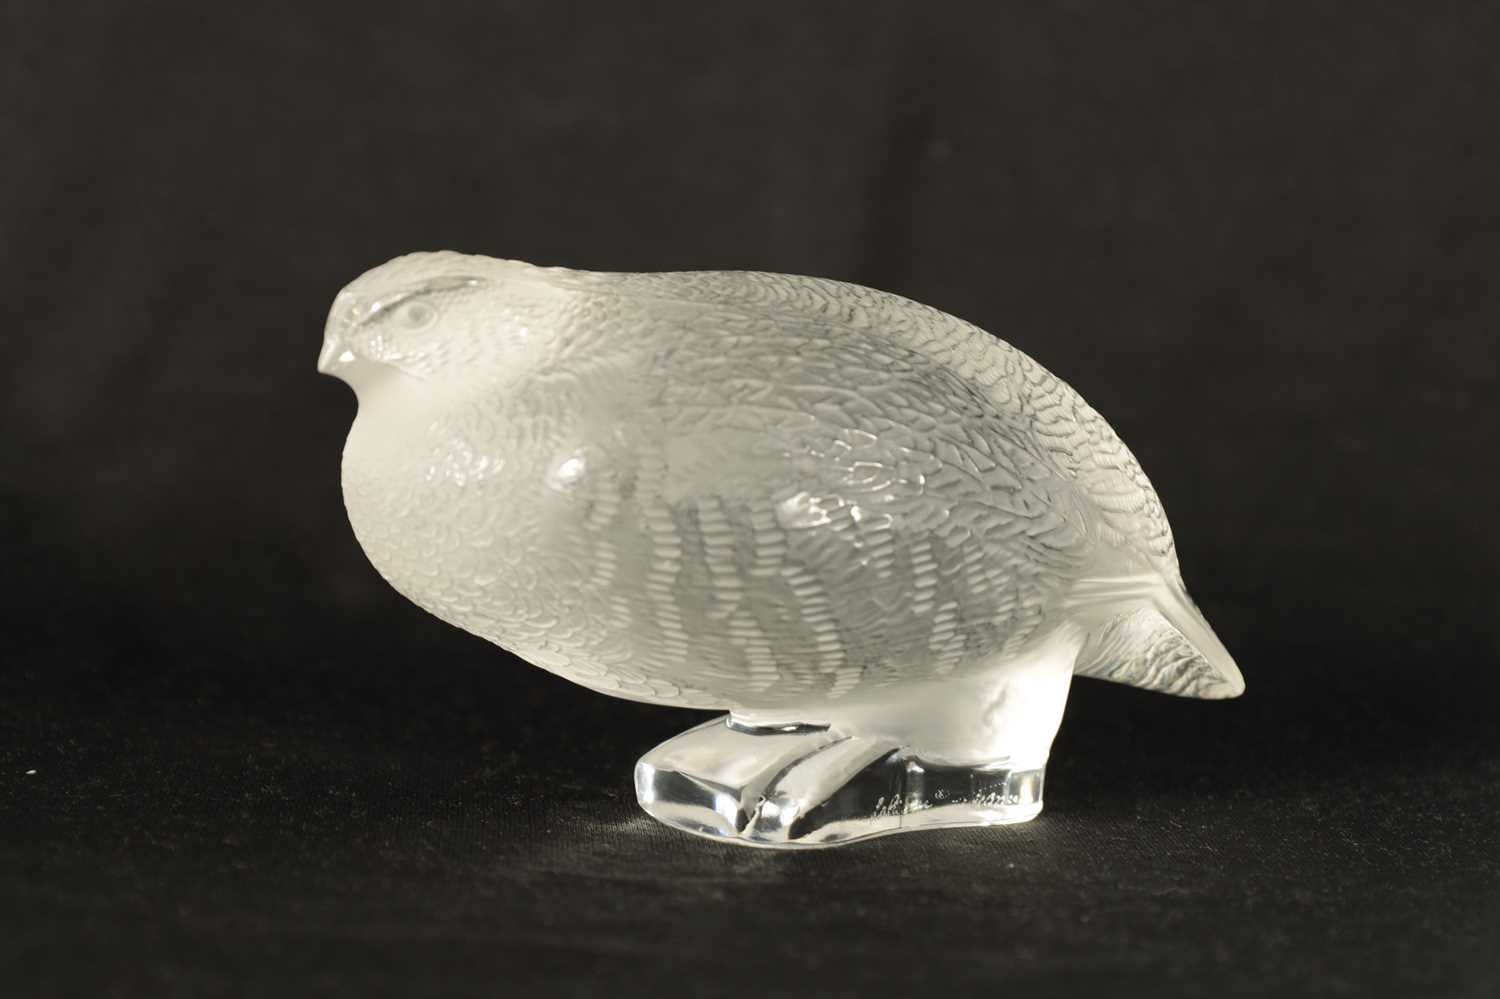 A LALIQUE FRANCE FROSTED GLASS BIRD SCULPTURE - Image 2 of 10